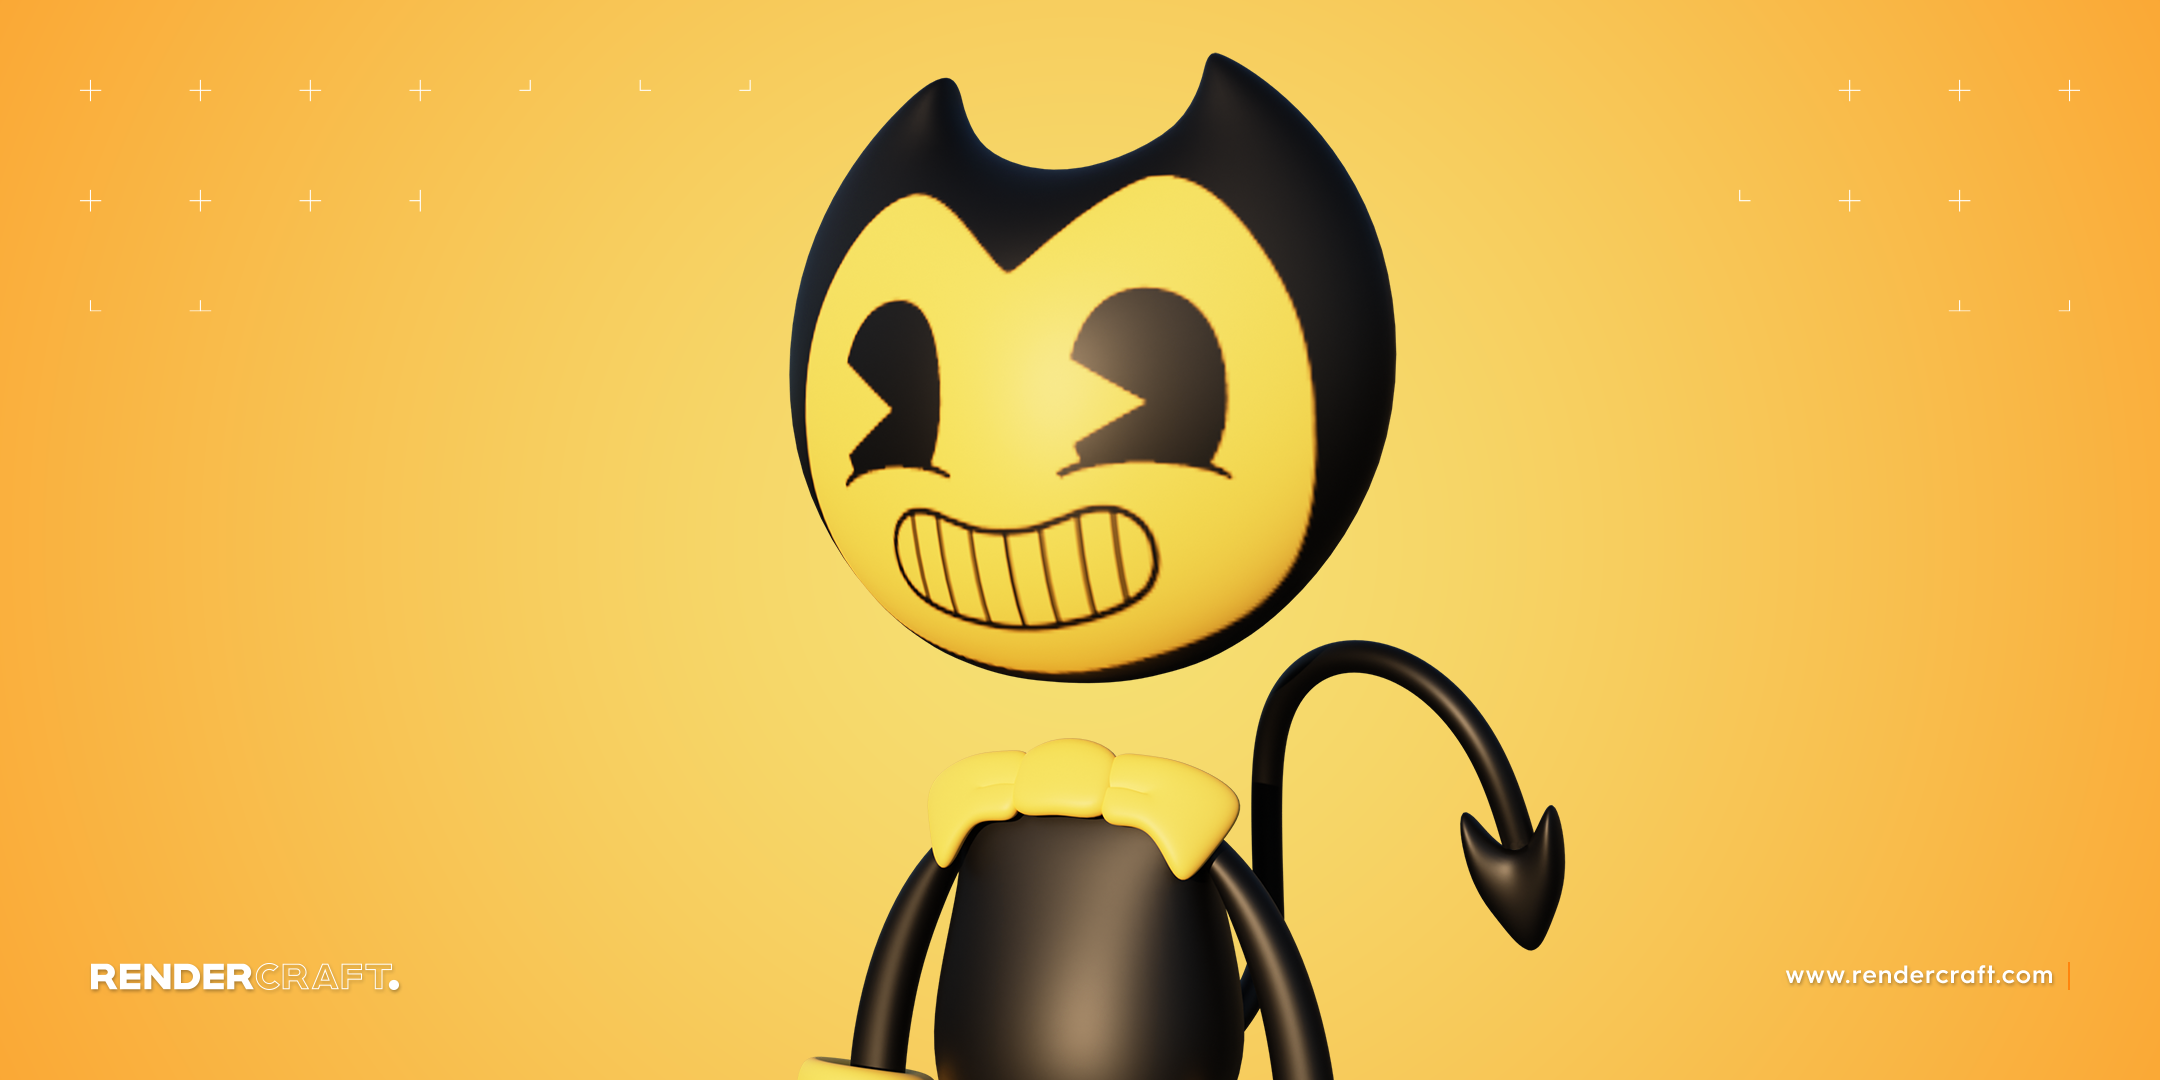 Bendy Character Game 